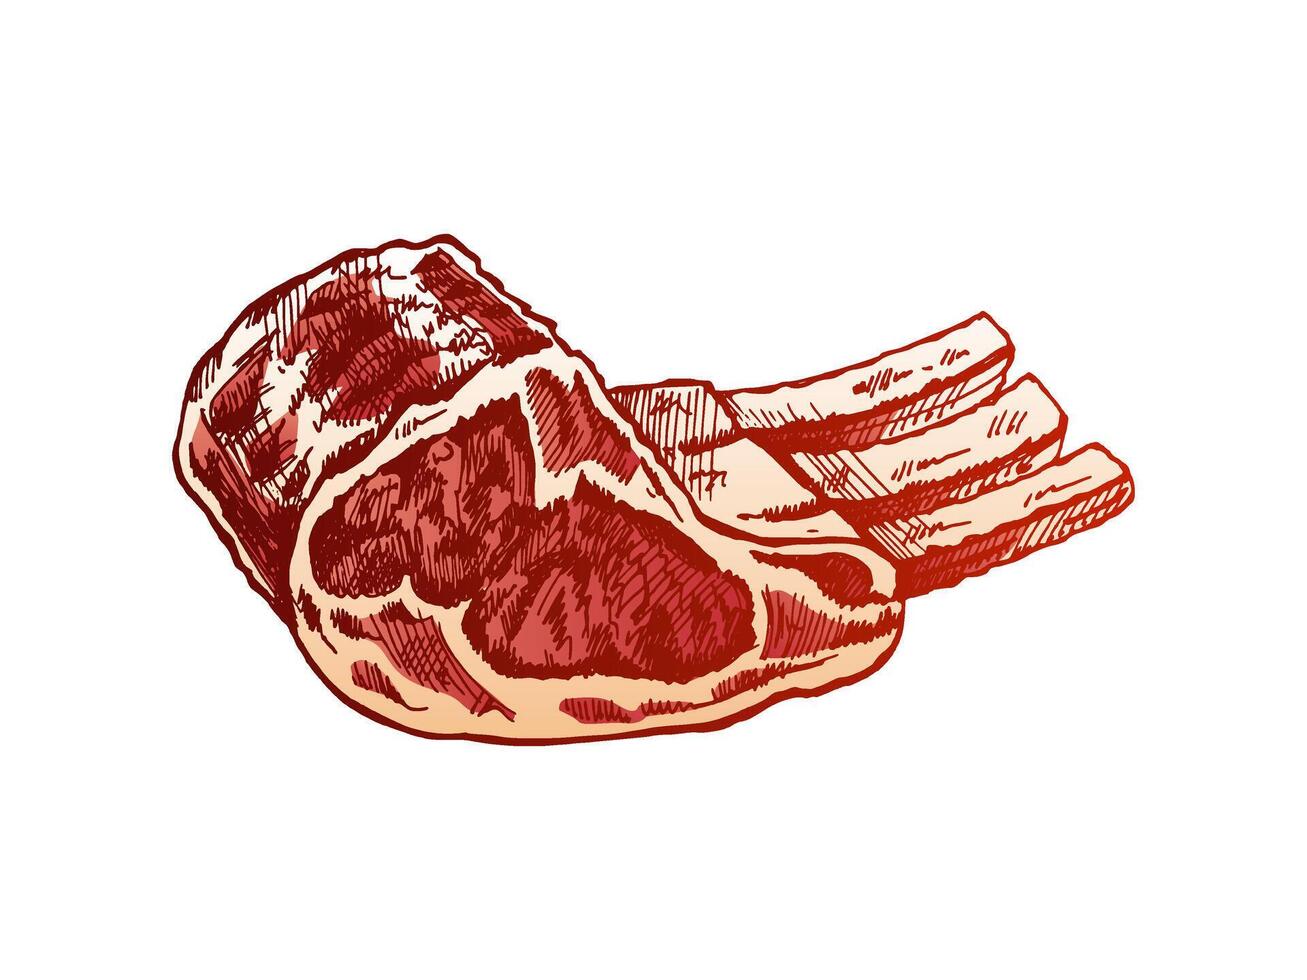 Organic food. Hand-drawn colored vector sketch of pork, beaf, lamb ribs, piece of meat. Vintage illustration. Decorations for the menu of cafes. Engraved image.